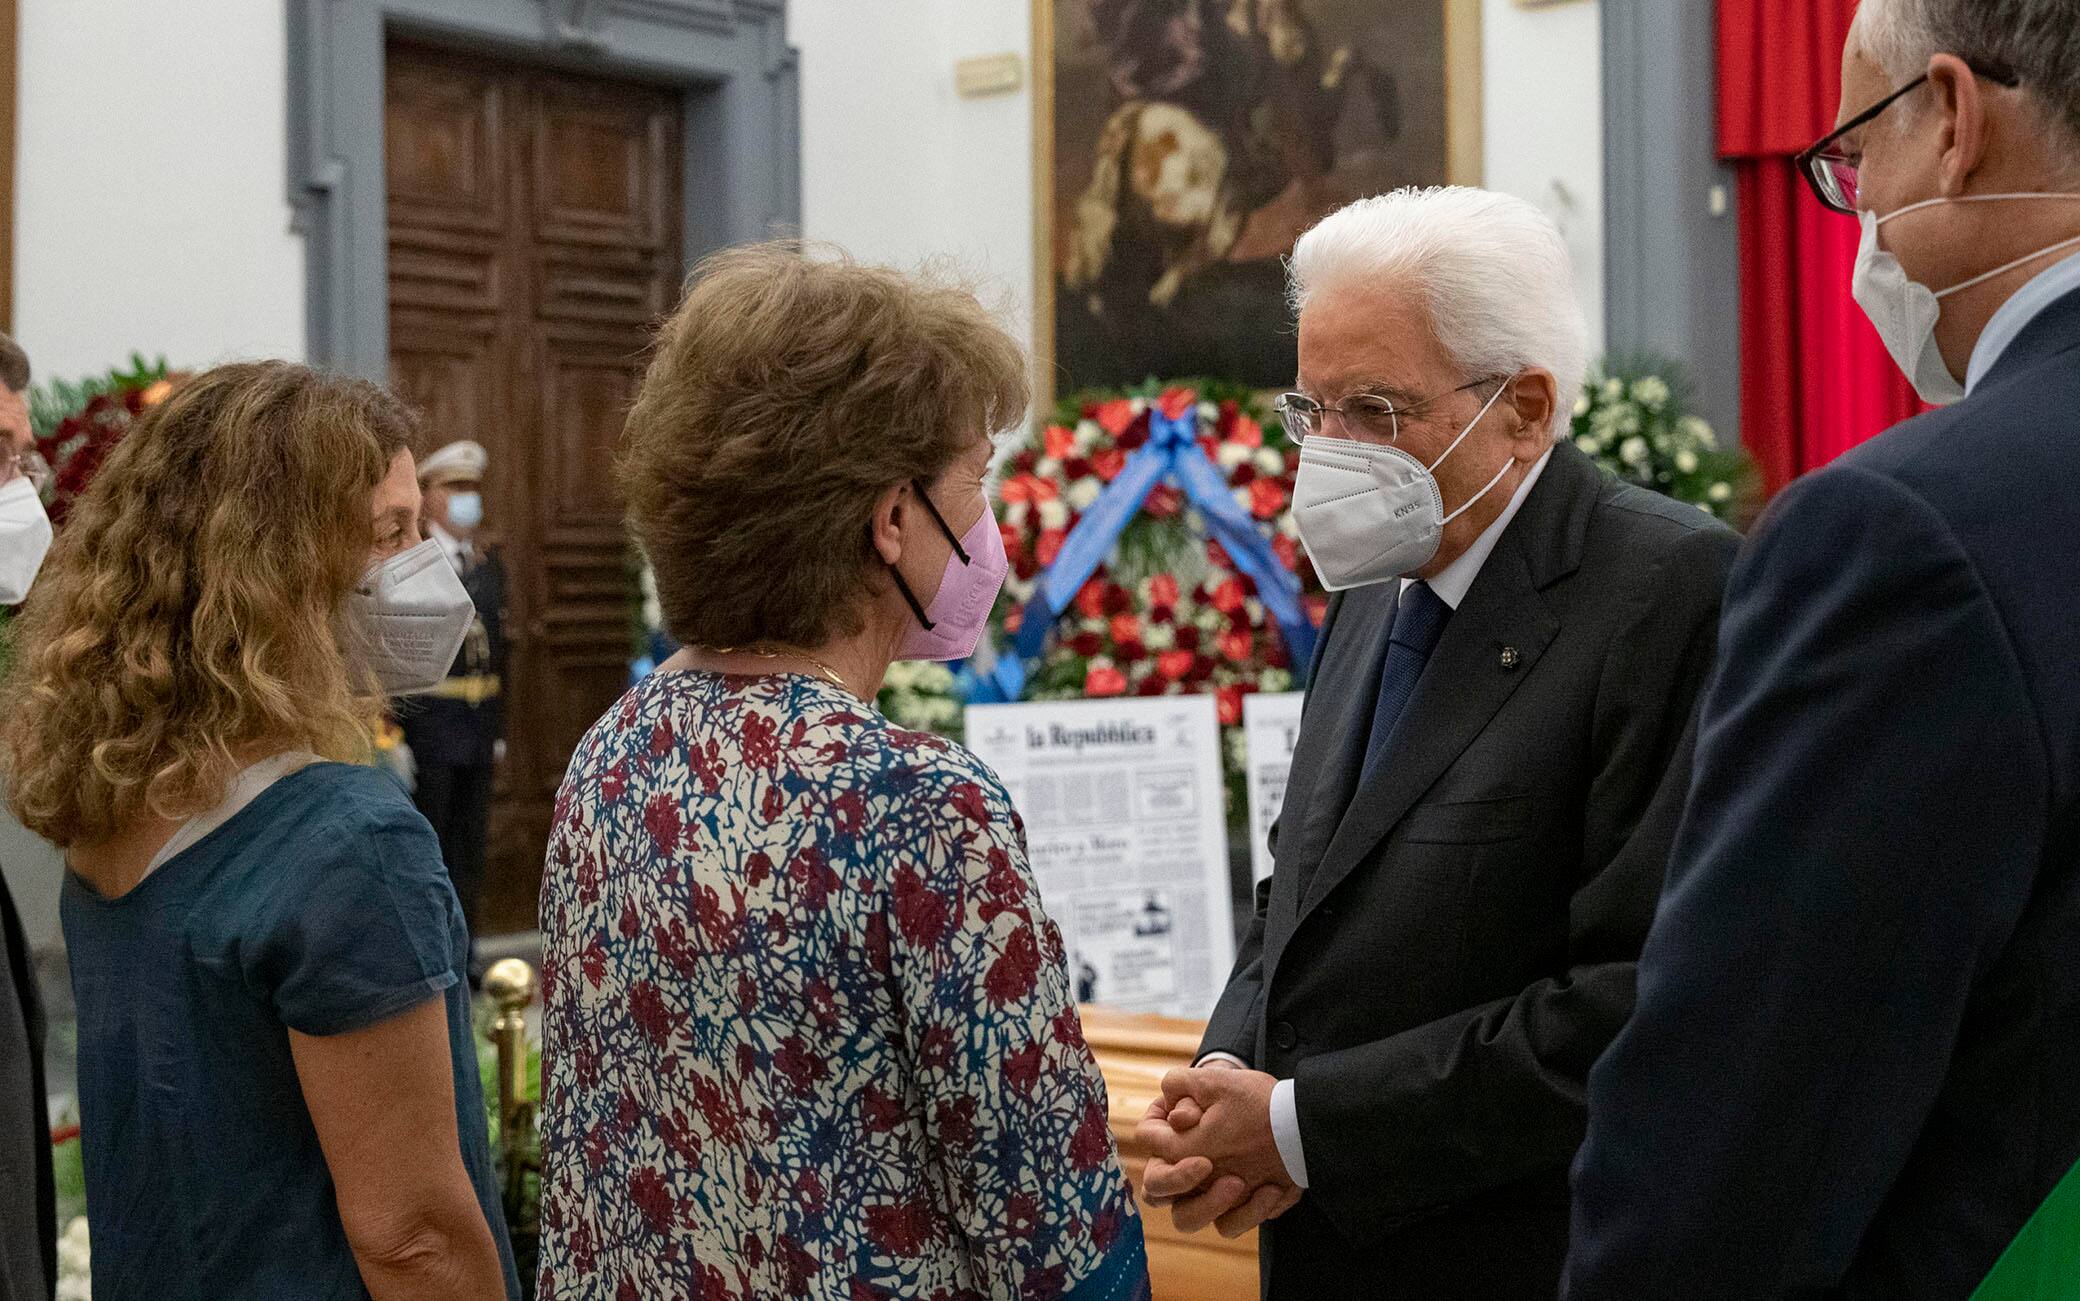 This handout picture provided by the Quirinal Press Office shows Italian President Sergio Mattarella arriving to pay his respects to Italian journalist Eugenio Scalfari as the coffin lies in state at the City Hall in Rome, Italy, 15 July 2022. Scalfari, who died on 14 July at the age of 98, founded two of Italy's most important news publications, daily newspaper La Repubblica and investigative journalism weekly 'L'Espresso'. 
ANSA/ QUIRINAL PRESS OFFICE/ FRANCESCO AMMENDOLA
+++ ANSA PROVIDES ACCESS TO THIS HANDOUT PHOTO TO BE USED SOLELY TO ILLUSTRATE NEWS REPORTING OR COMMENTARY ON THE FACTS OR EVENTS DEPICTED IN THIS IMAGE; NO ARCHIVING; NO LICENSING +++